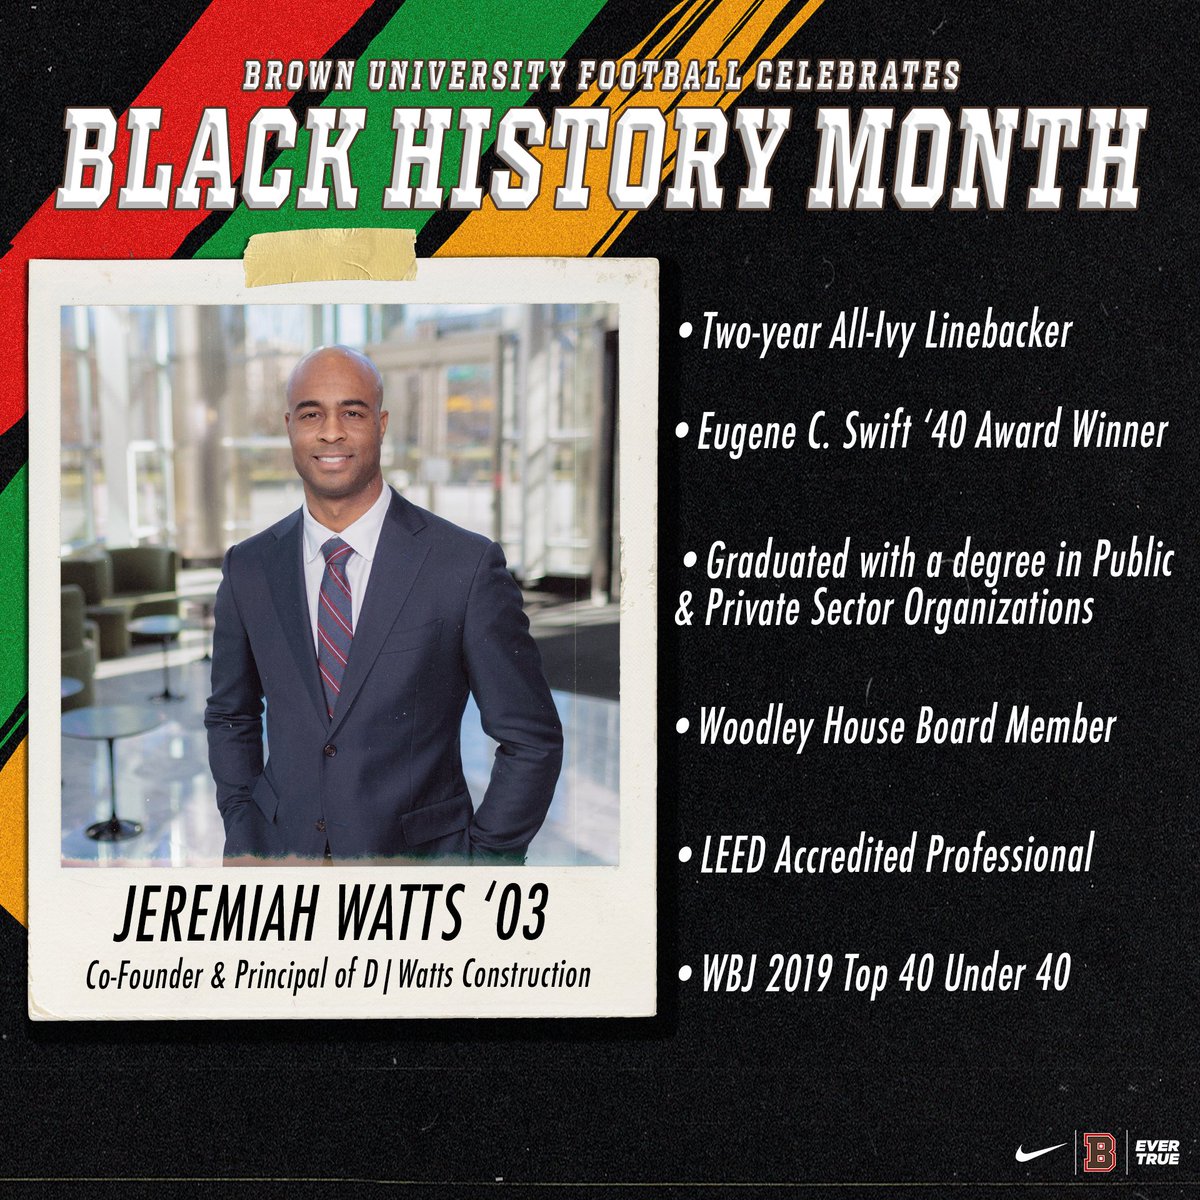 Today we recognize Jeremiah Watts '03. Jeremiah was a two-year All-Ivy Linebacker at Brown and now serves as the Co-Founder & Principal of D|Watts Construction. #EverTrue #BlackHistoryMonth